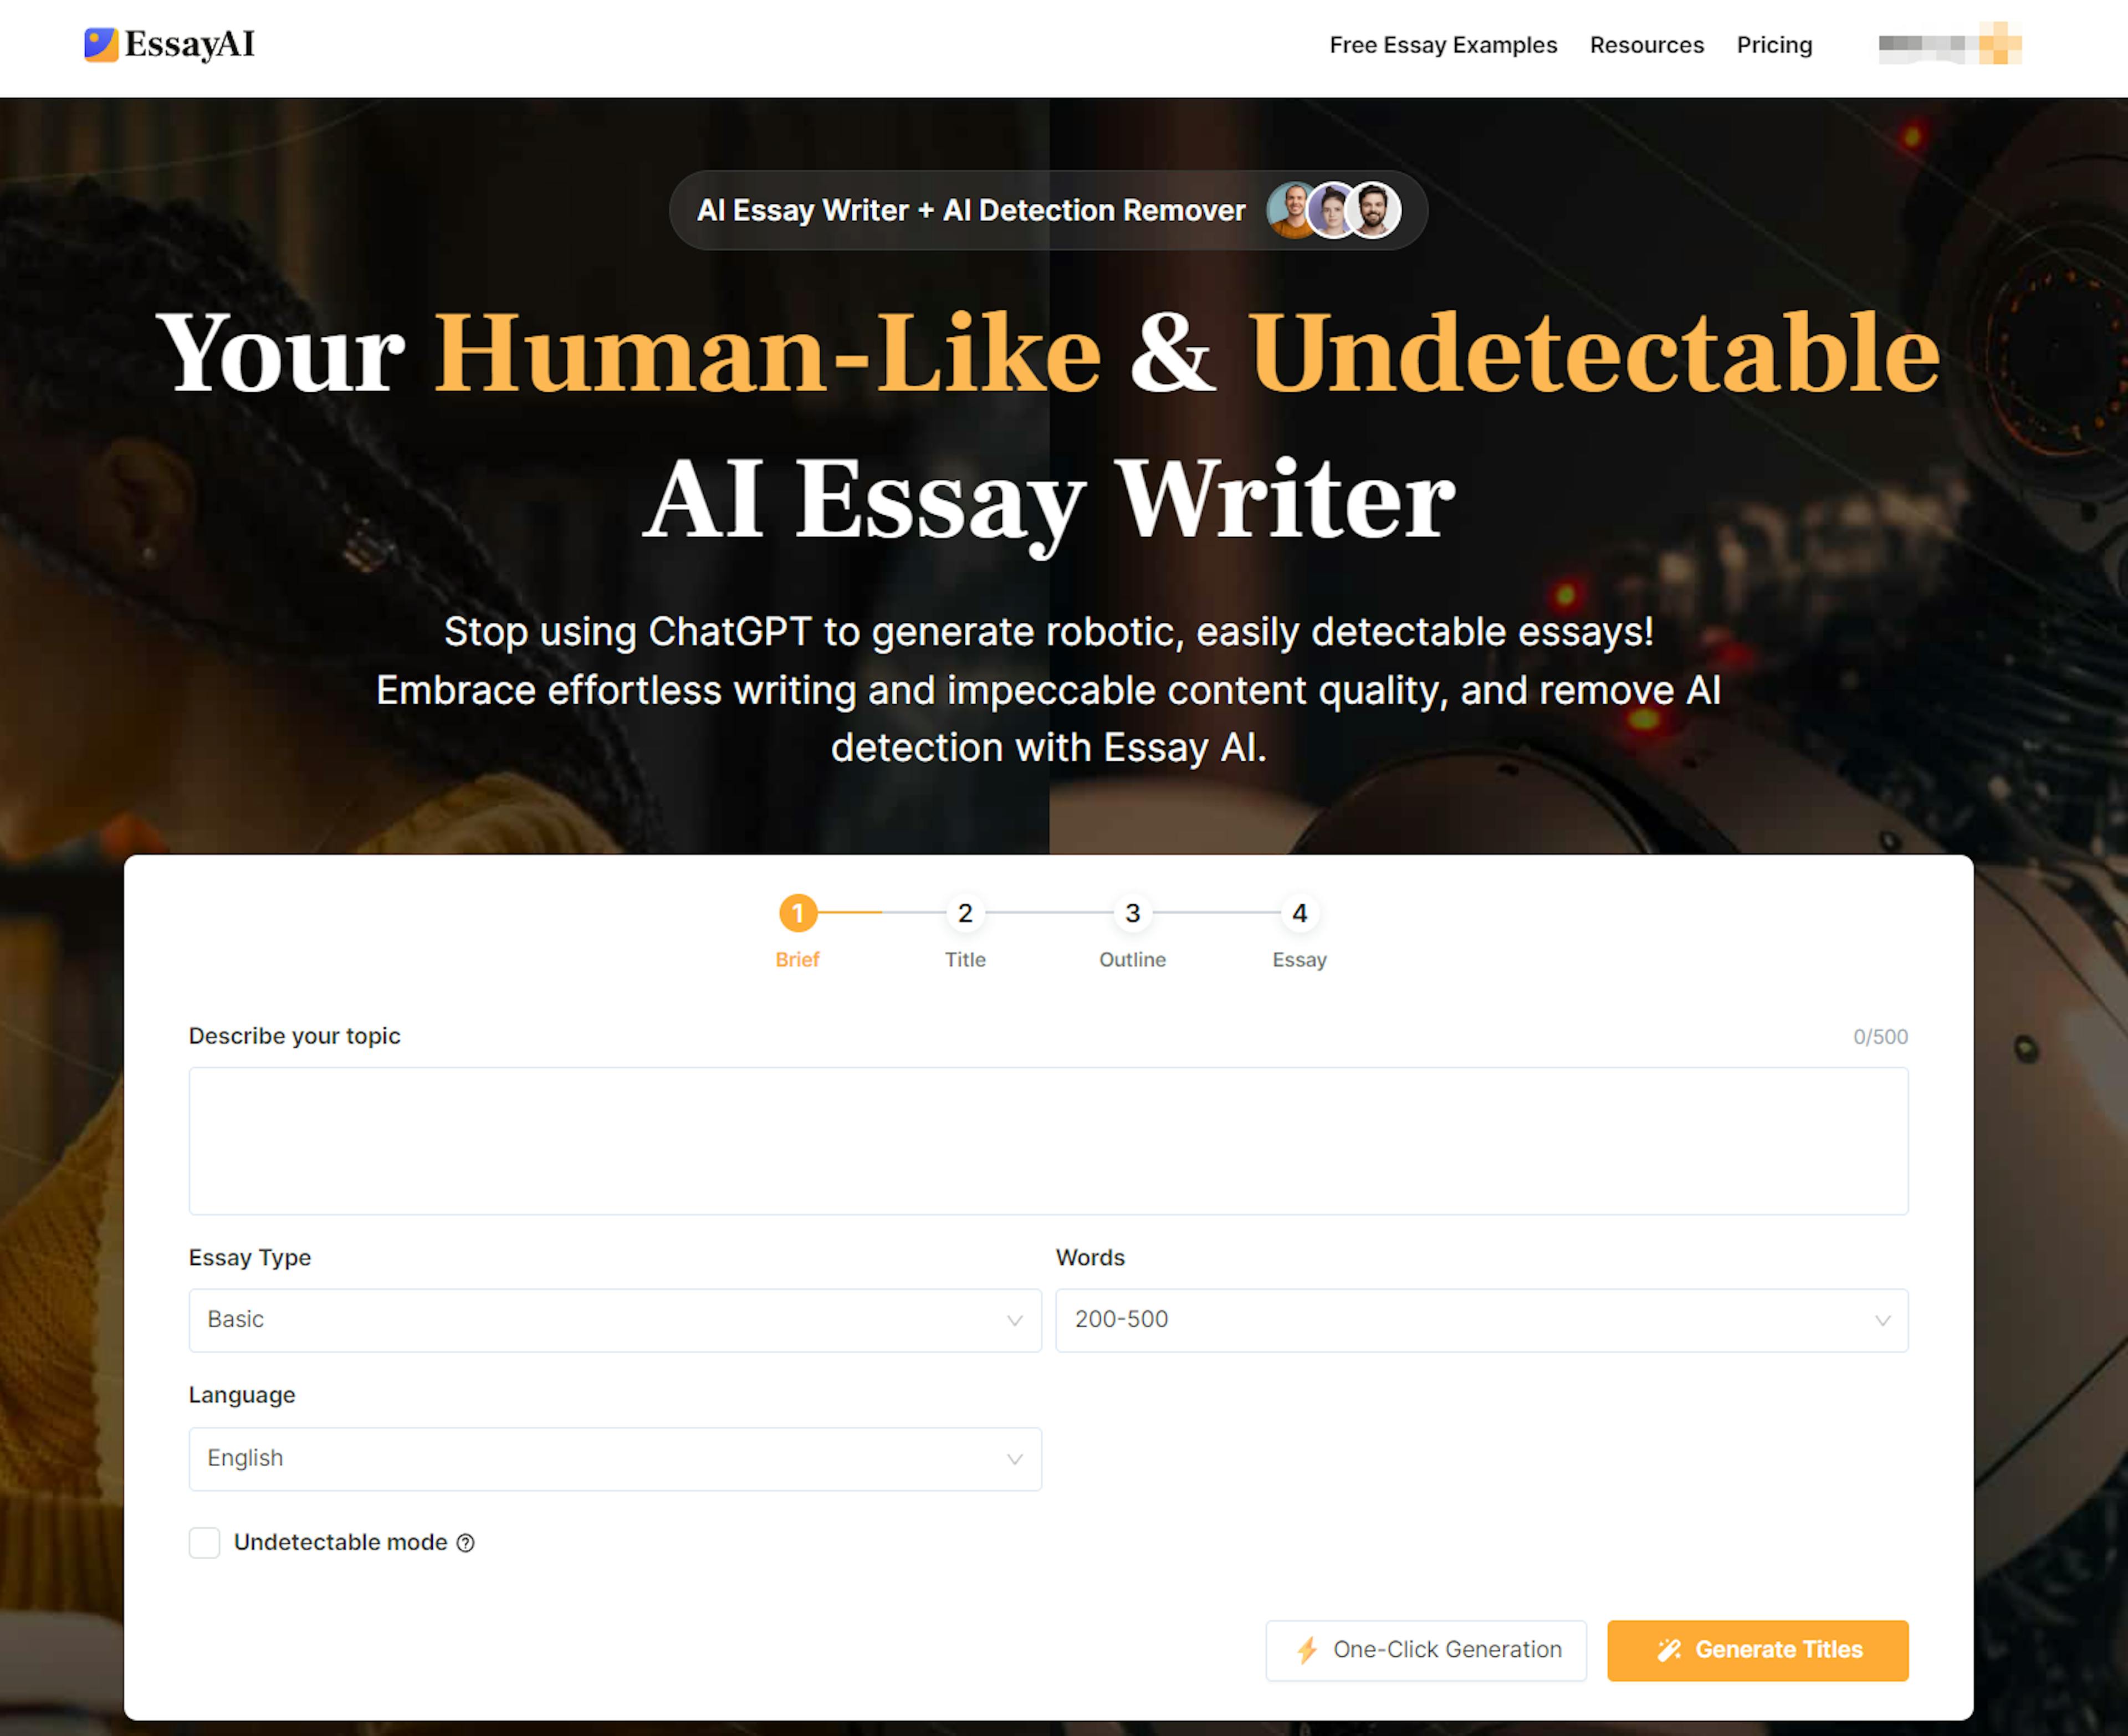 featured image - Essay AI Review: The No. 1 Option for Undetectable AI Essays